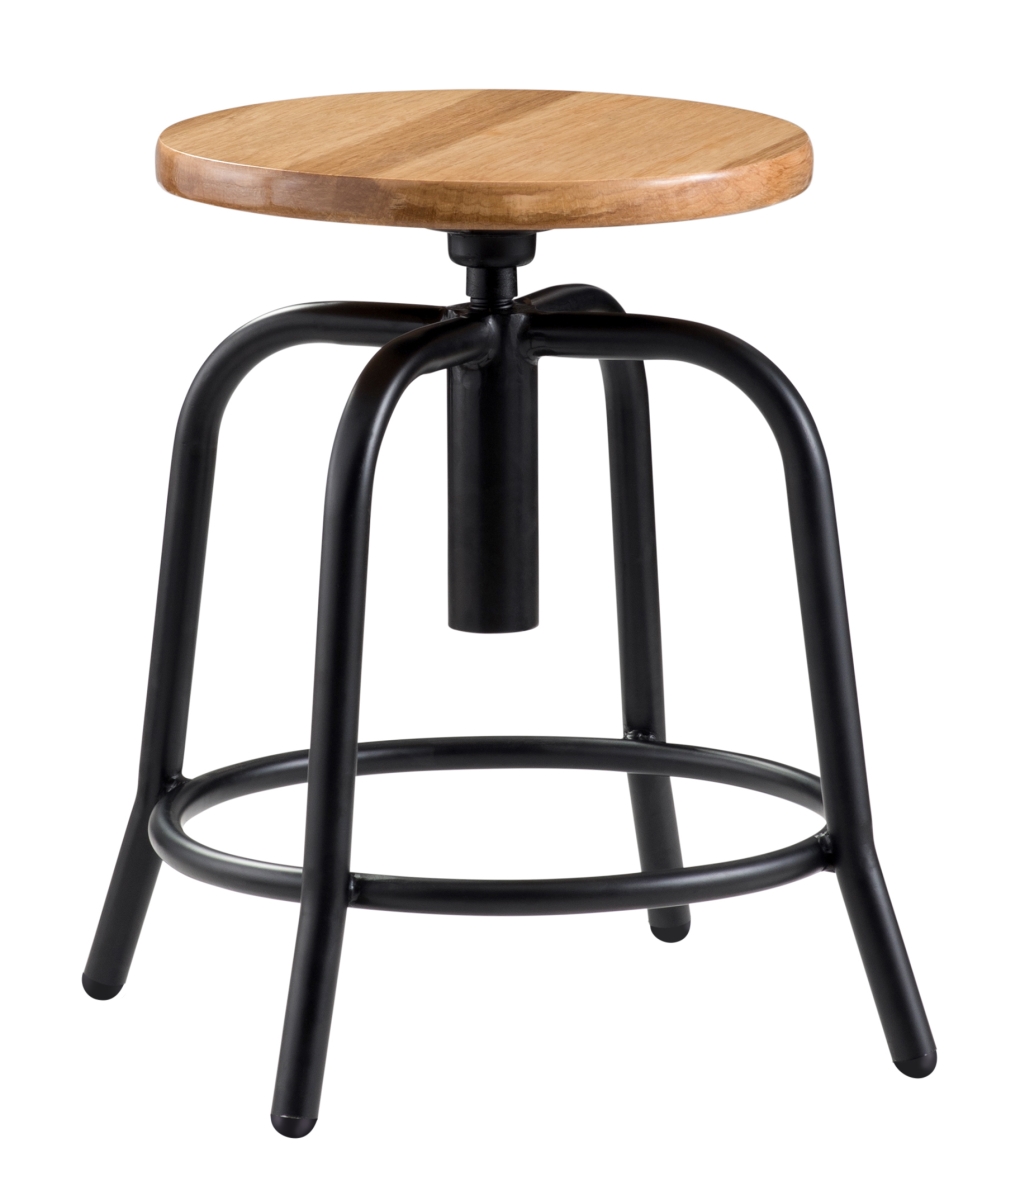 6800w-10 18 - 25 In. Height Adjustable Designer Stool With Wooden Seat & Black Frame